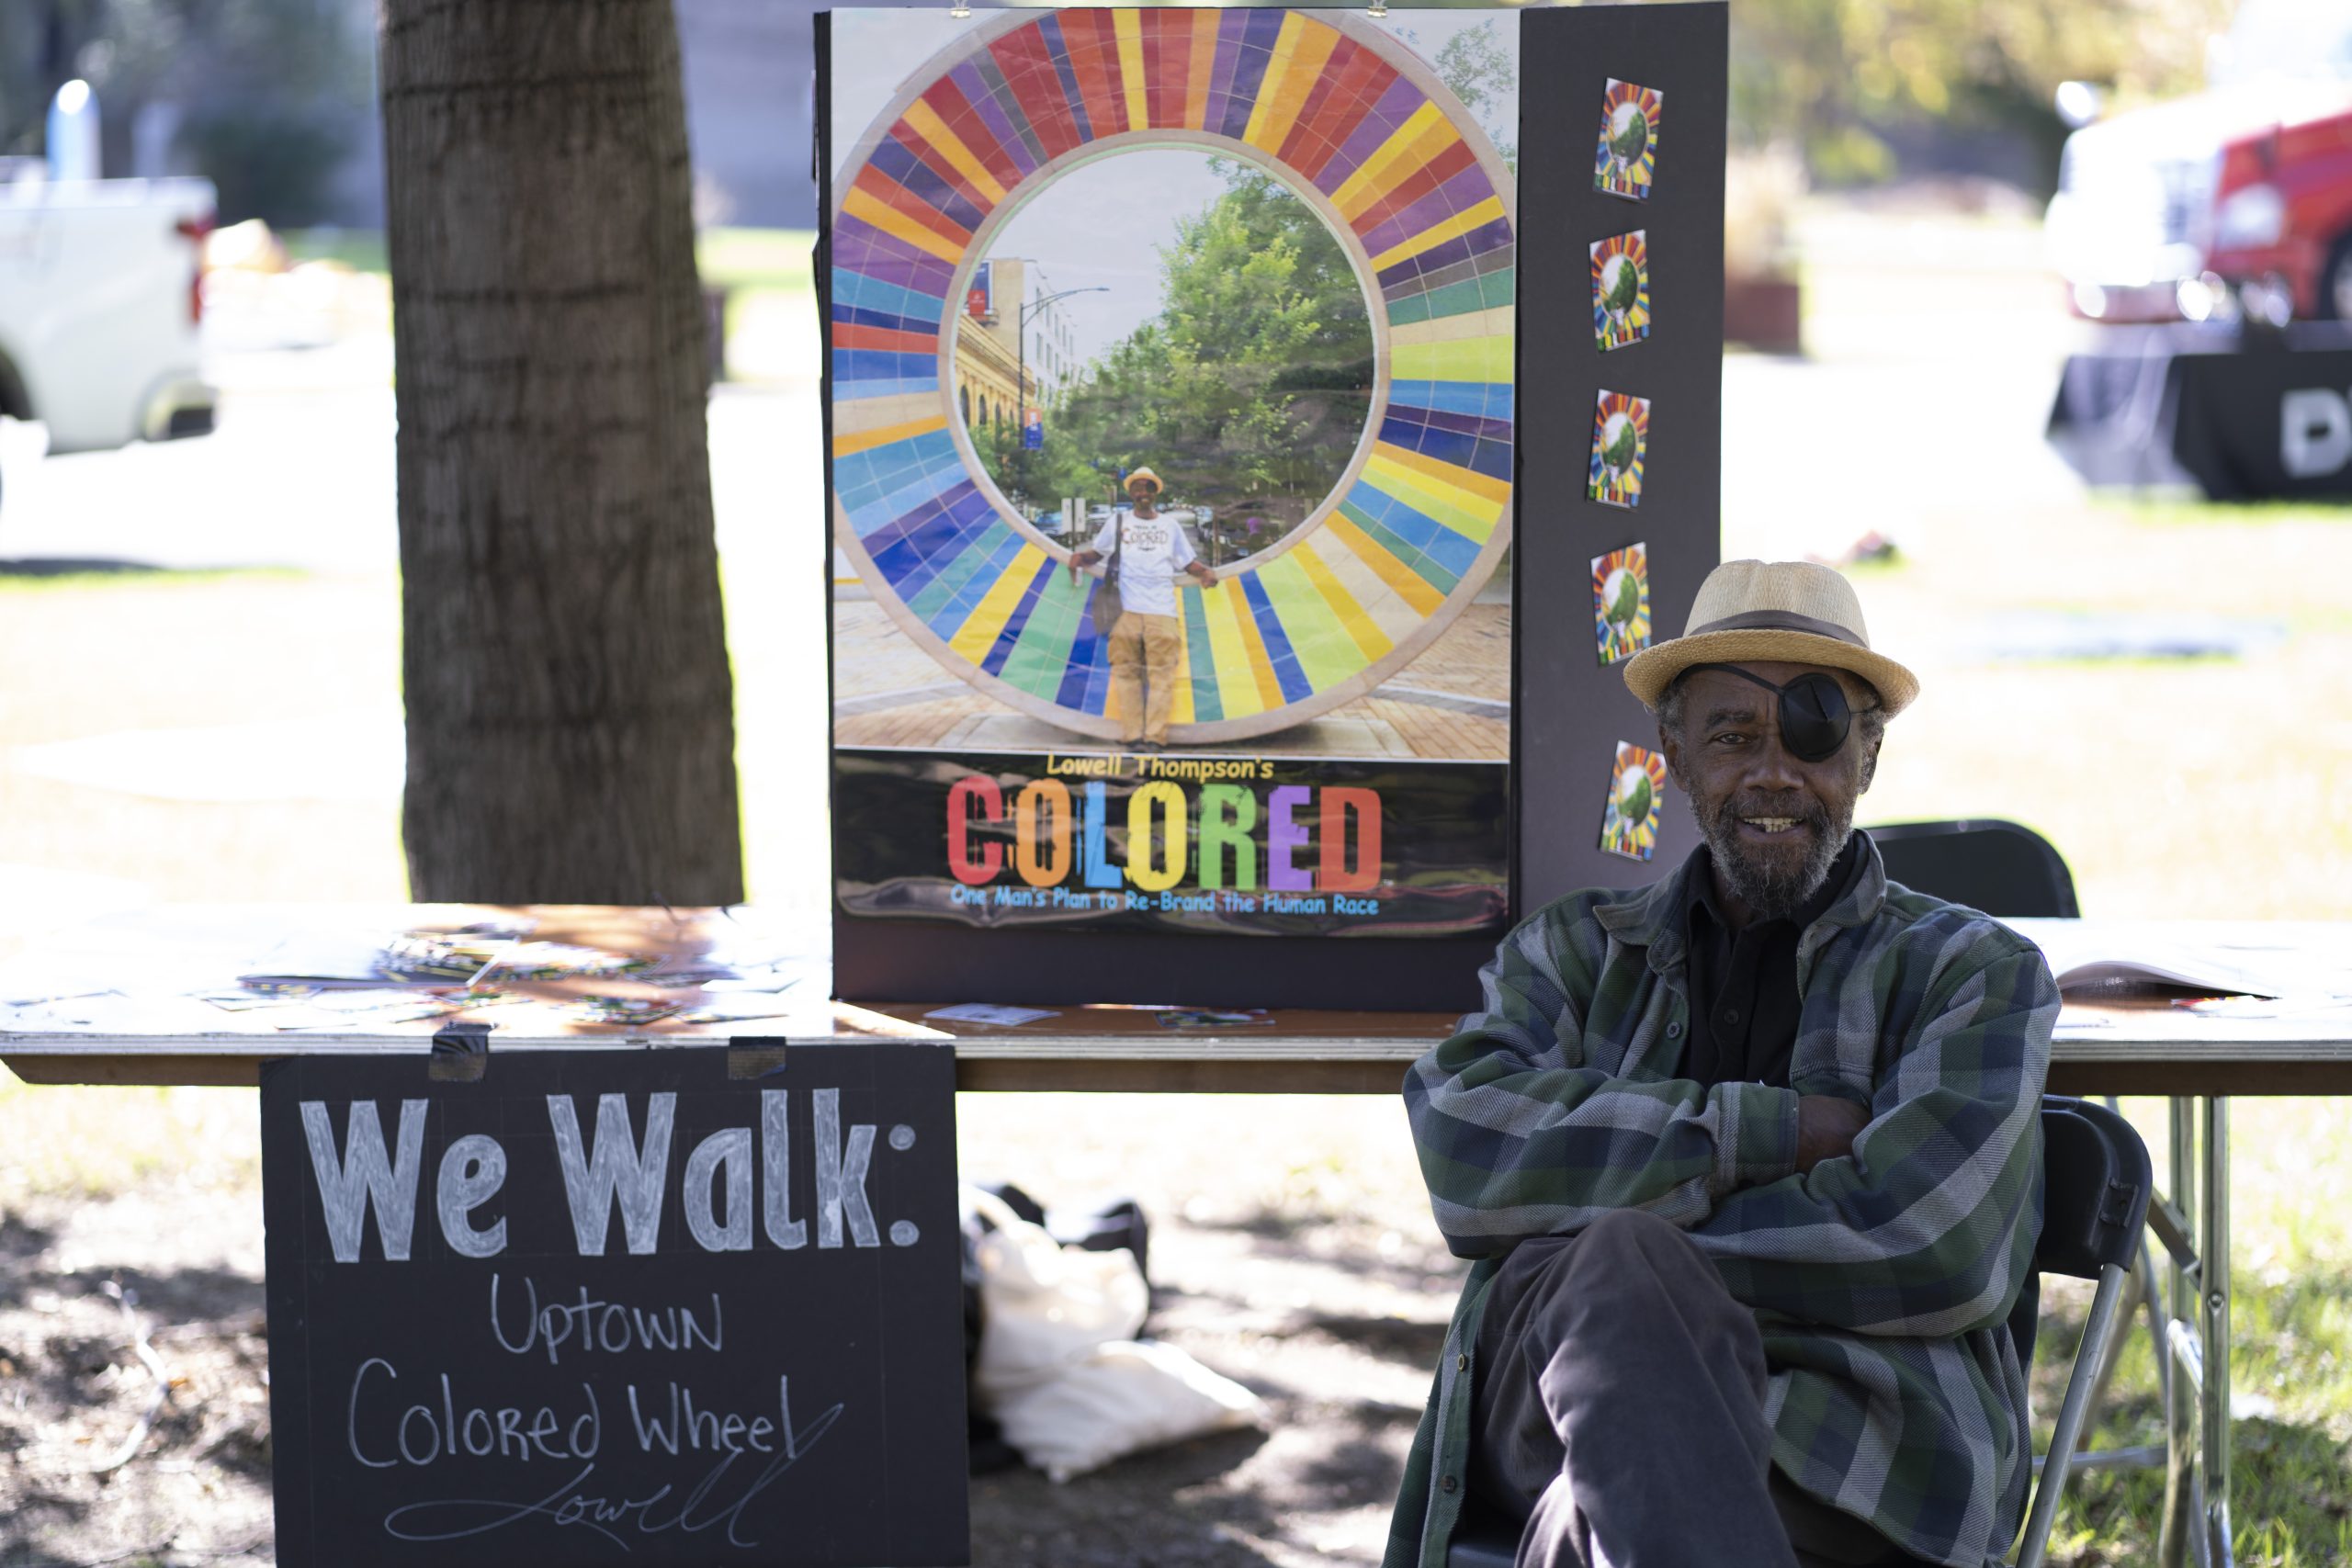 Photo: Artist Lowell Thompson at a previous “We Walk” in front of a poster of his Colored Wheel sculpture, credit Haitian American Museum of Chicago